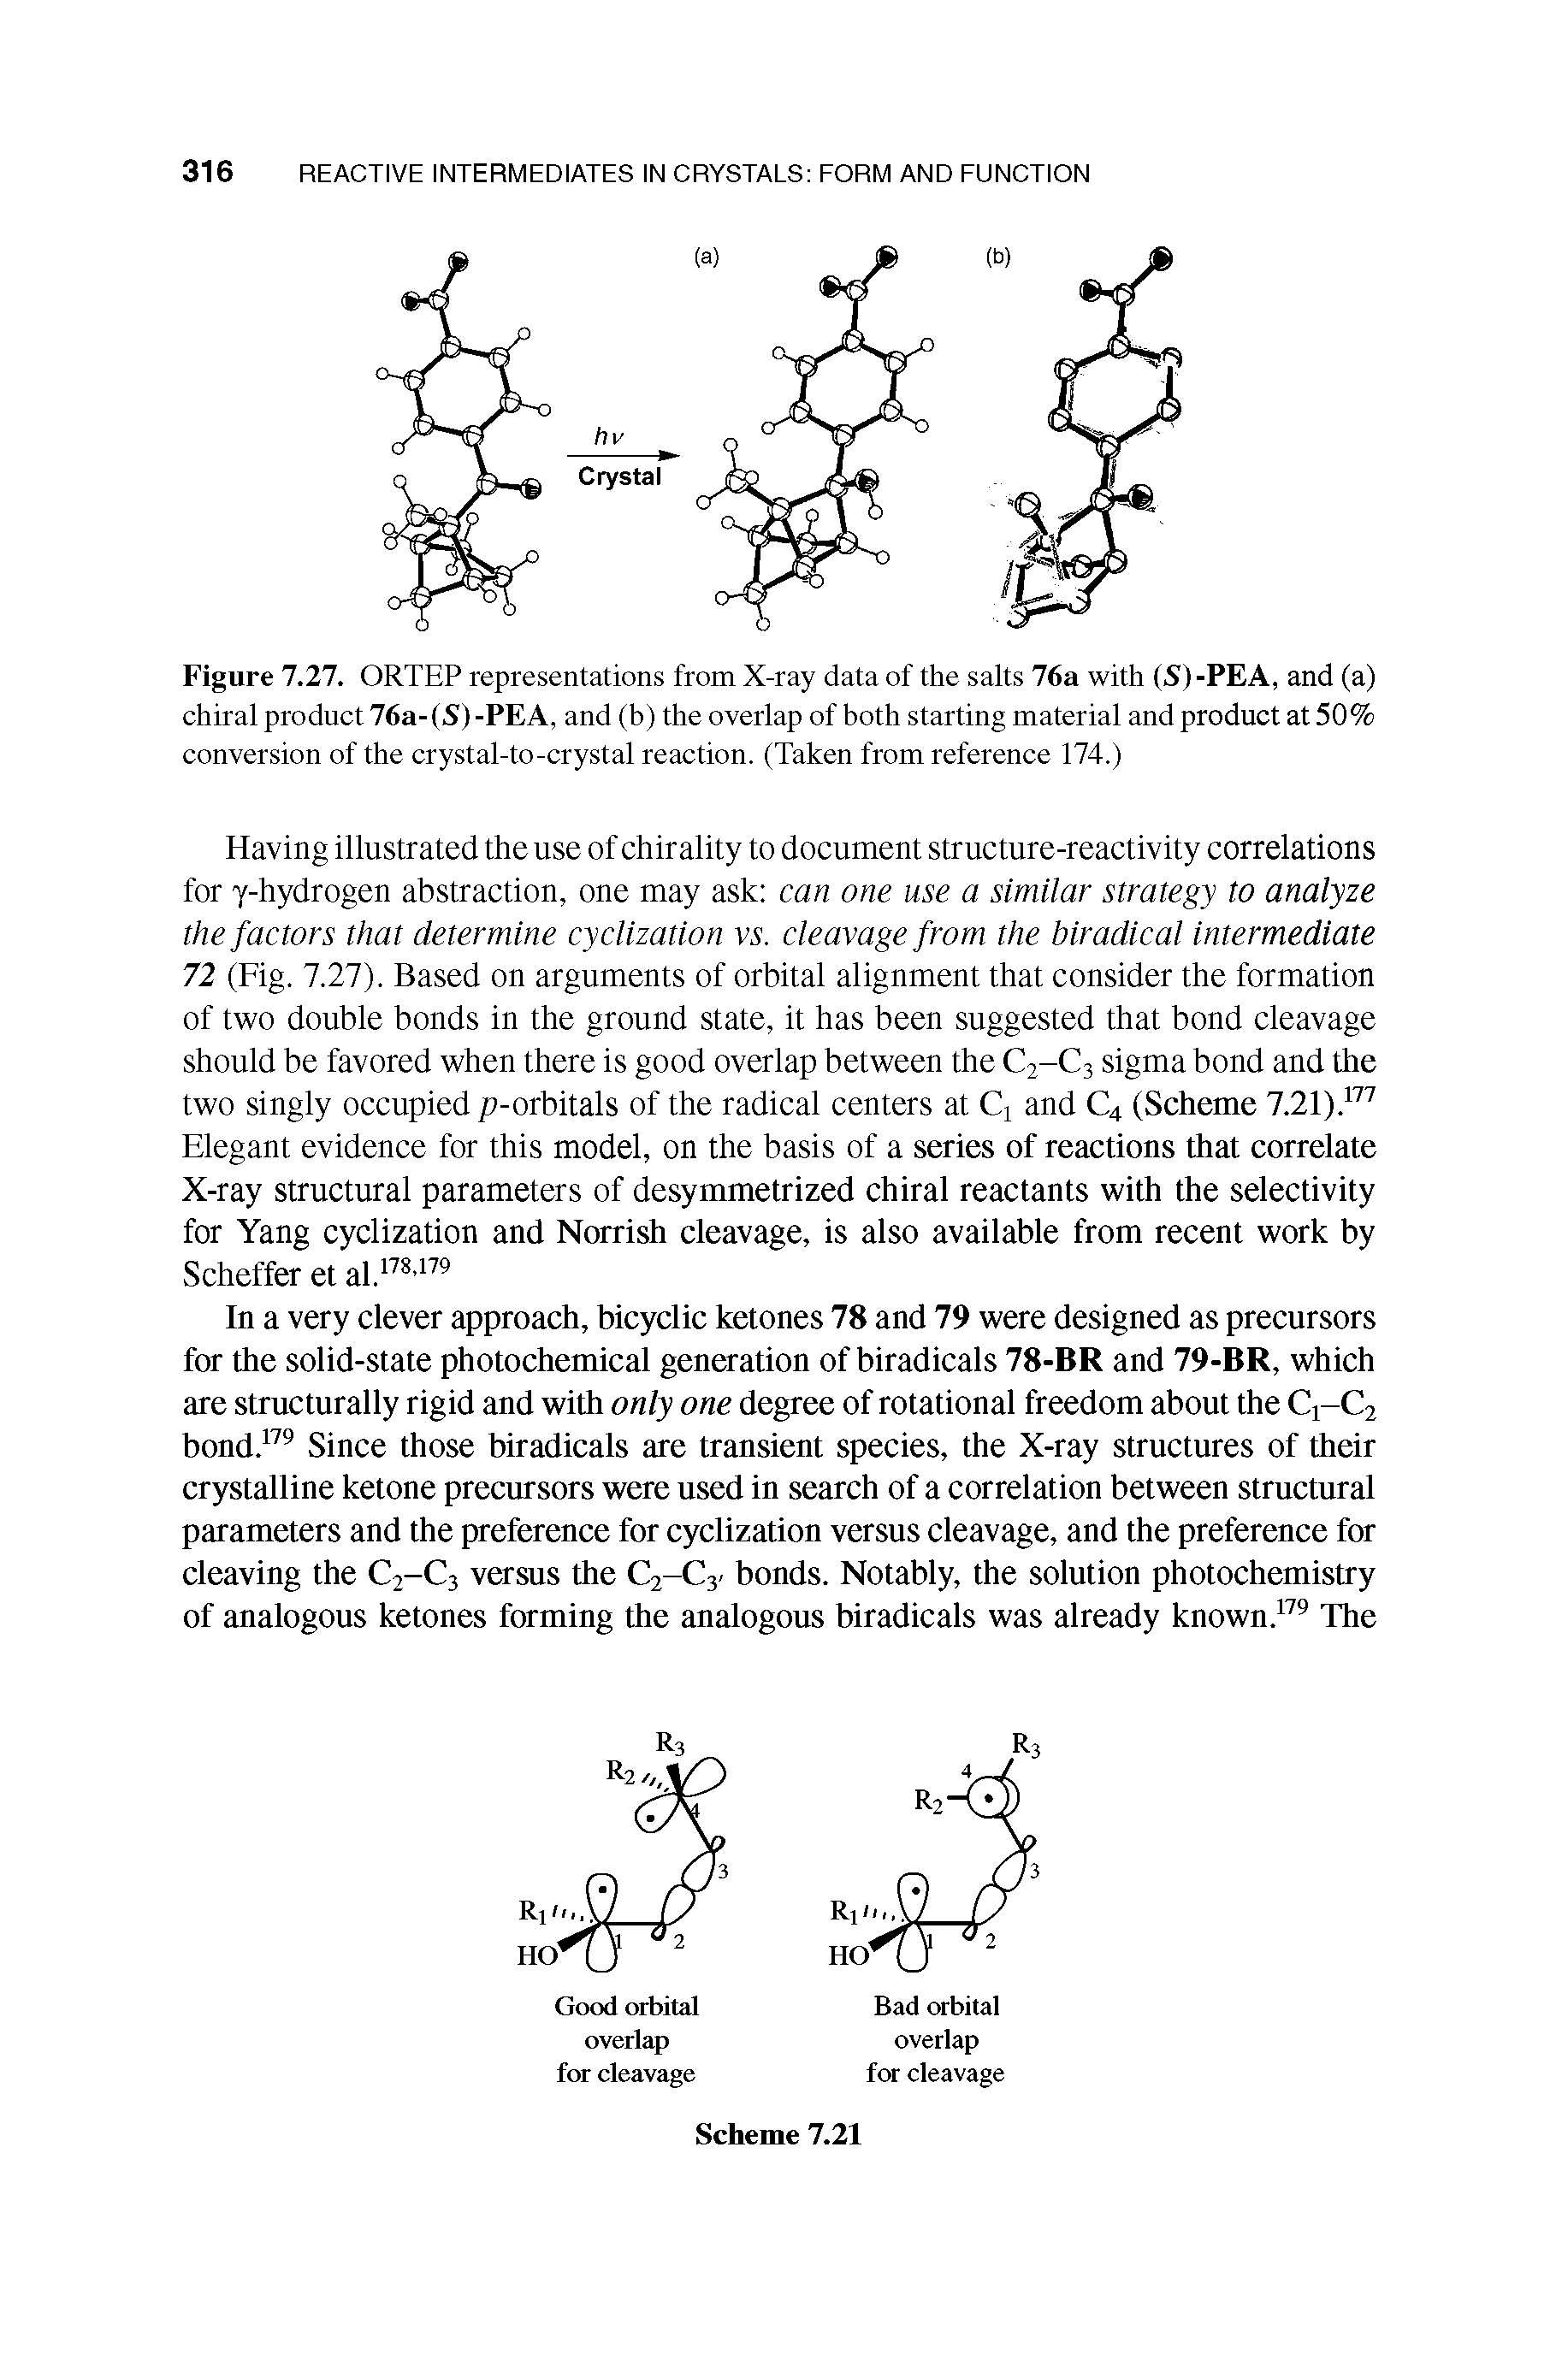 Figure 7.27. ORTEP representations from X-ray data of the salts 76a with (S)-PEA, and (a) chiral product 76a-(S)-PEA, and (b) the overlap of both starting material and product at 50% conversion of the crystal-to-crystal reaction. (Taken from reference 174.)...